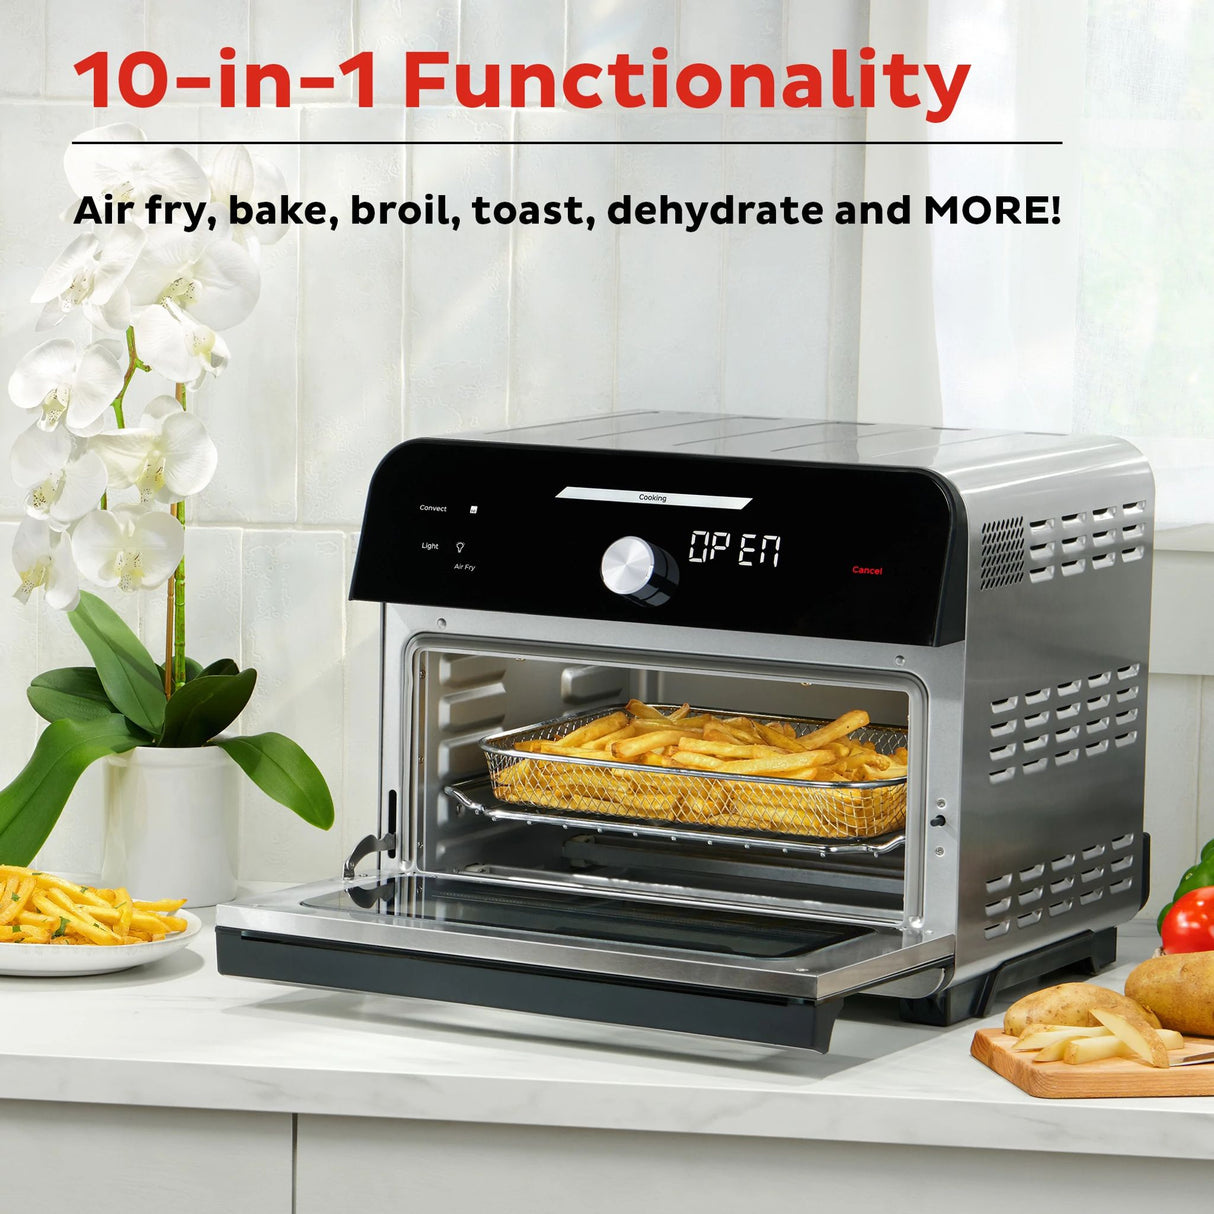  Instant Pot 18L Omni Plus Toaster Oven  front panel-text that says 10 in 1 functionality